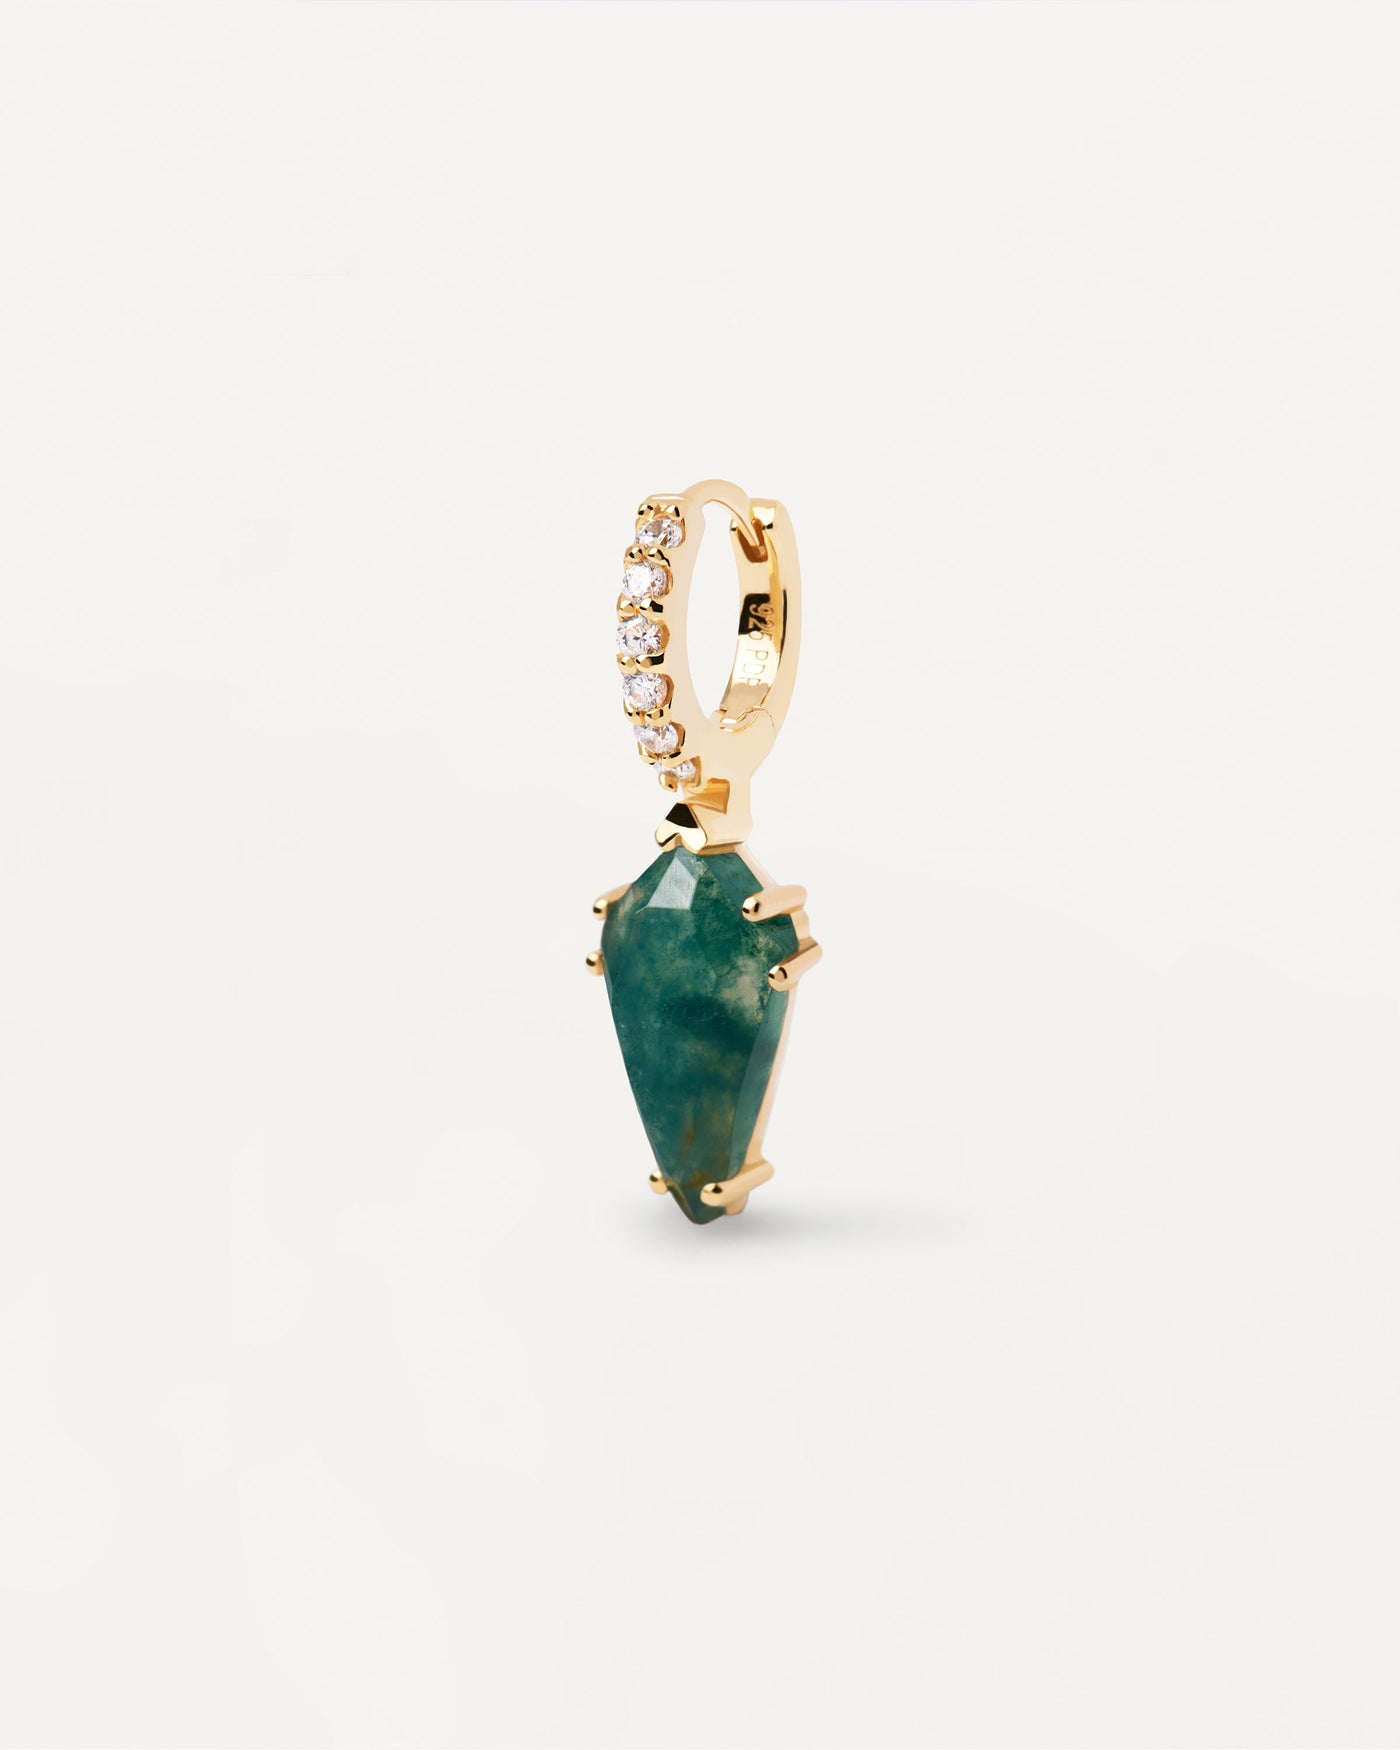 2023 Selection | Naoki Moss Agate Single Earring. Gold-plated hoop ear piercing with white zirconia and dark green pointed gemstone pendant. Get the latest arrival from PDPAOLA. Place your order safely and get this Best Seller. Free Shipping.